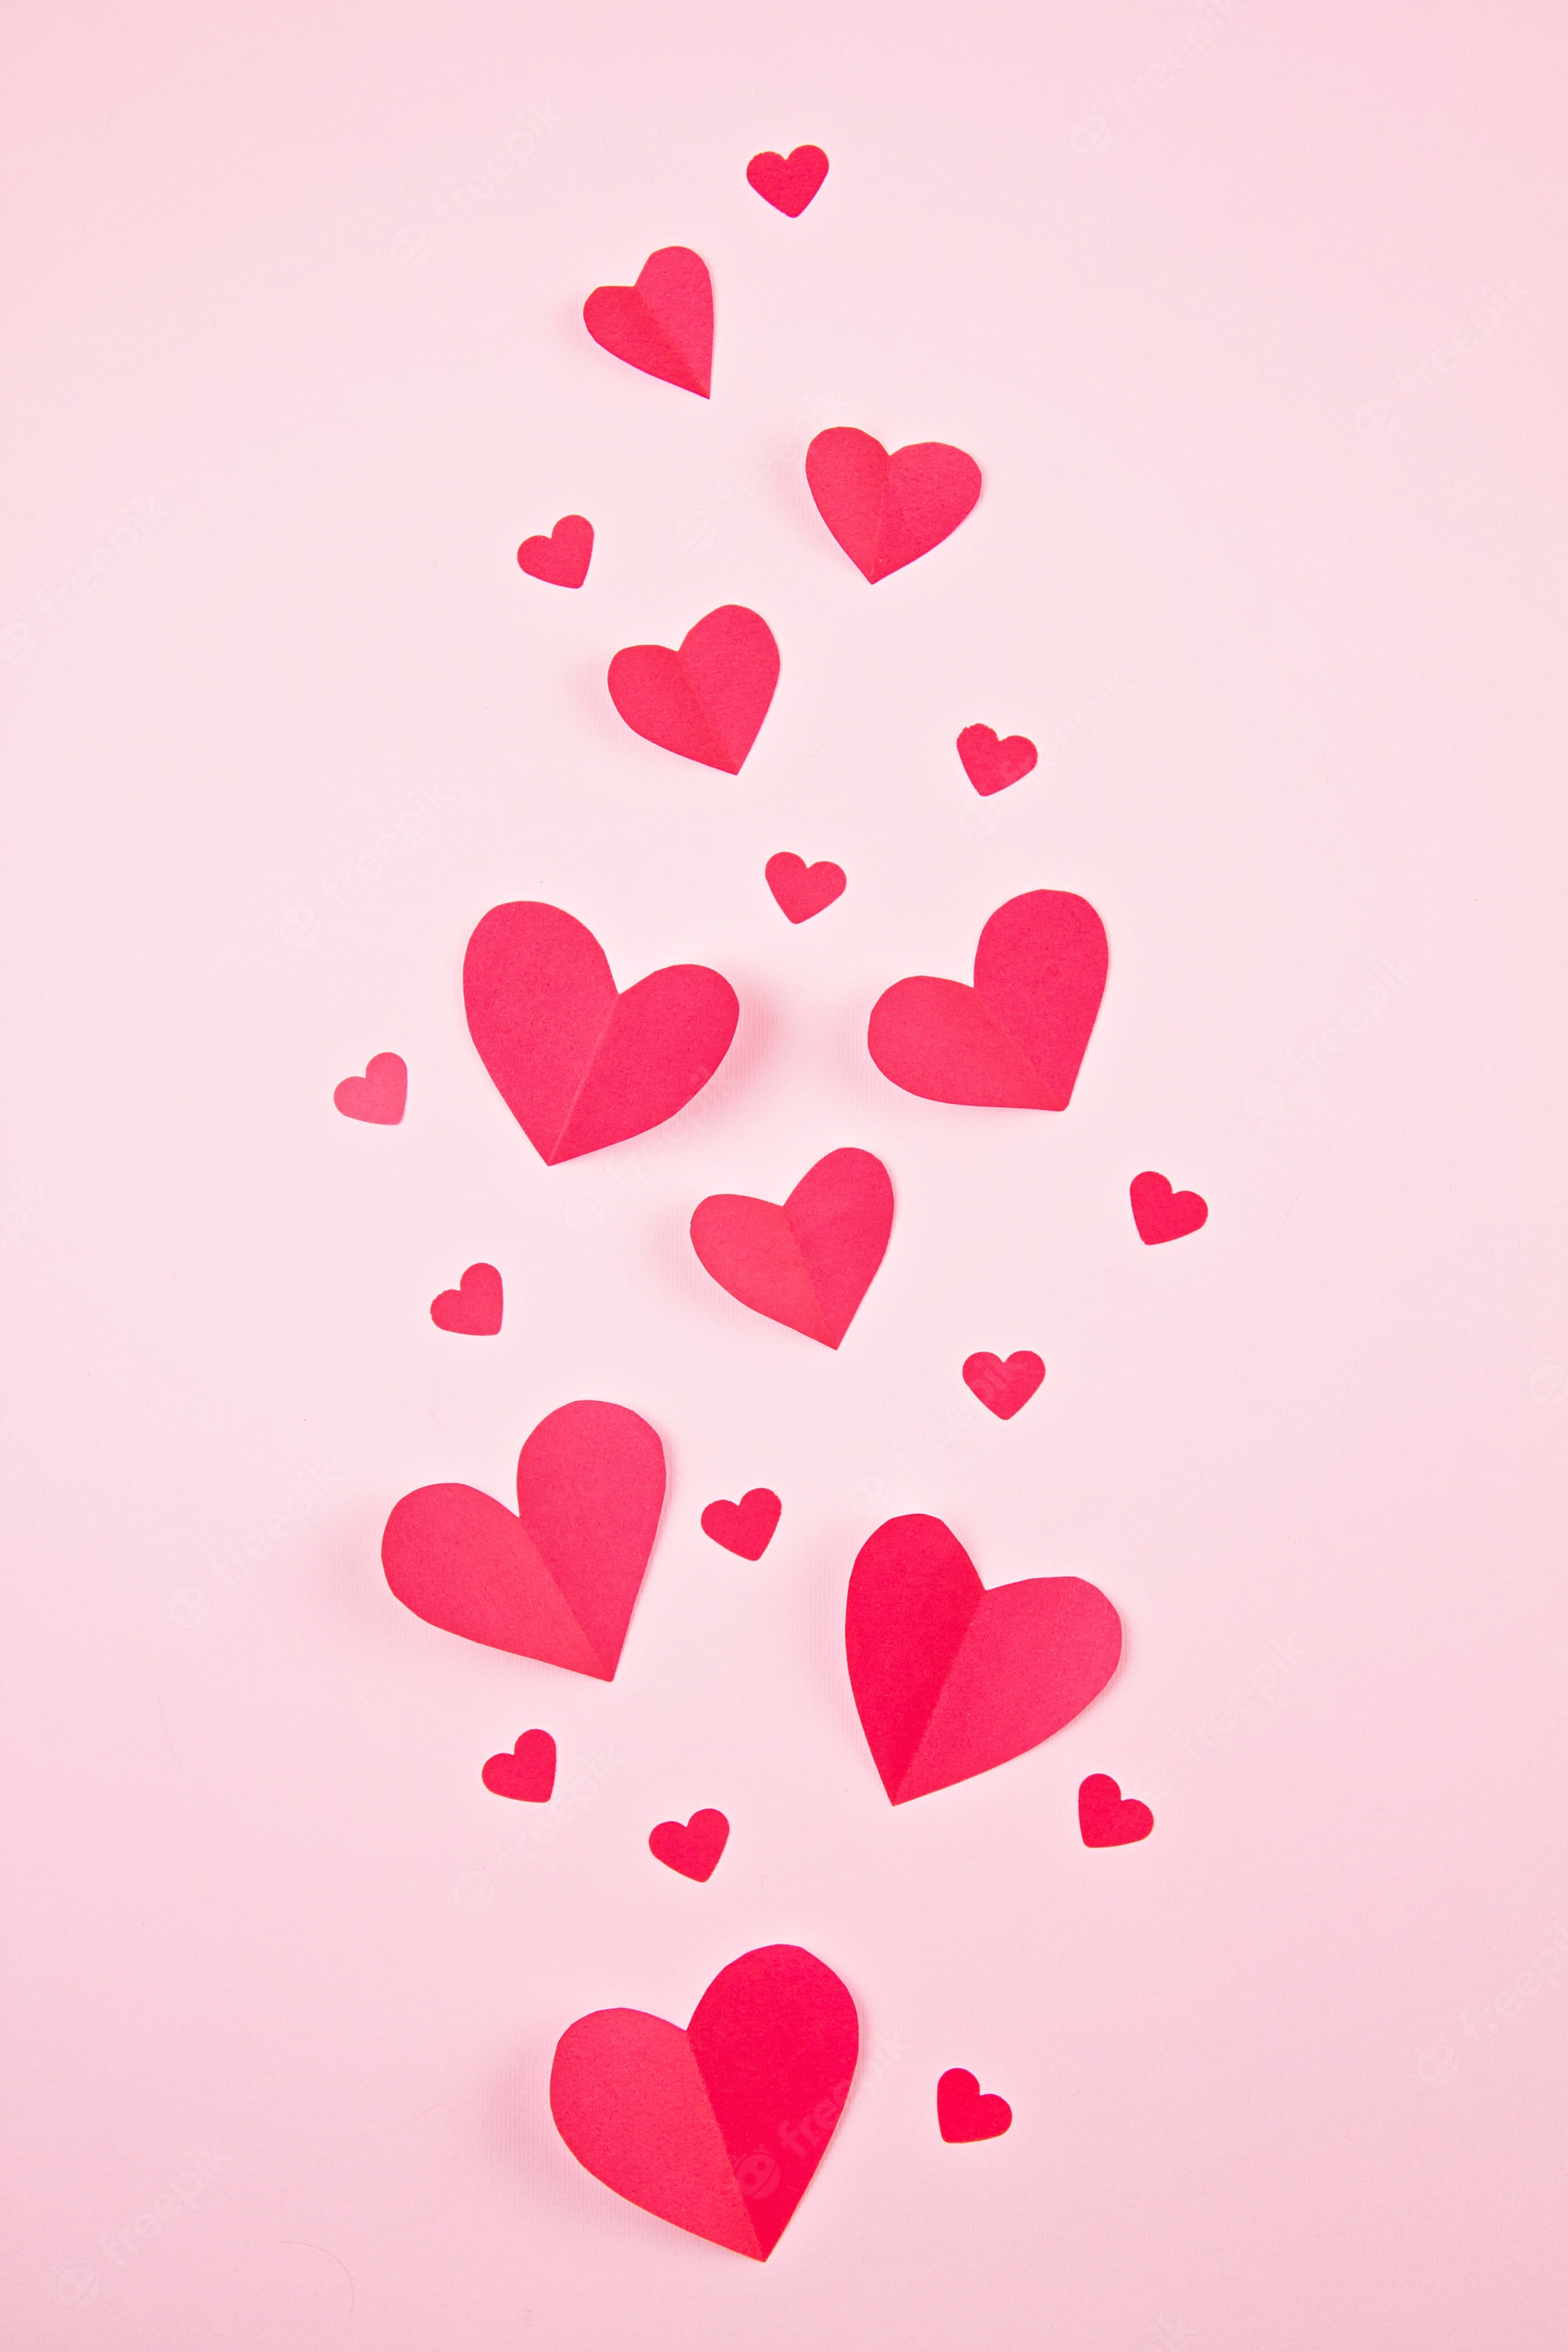 Premium Photo. Paper hearts over the pink pastel background. abstract background with paper cut shapes. sainte valentine, mother's day, birthday greeting cards, invitation, celebration concept